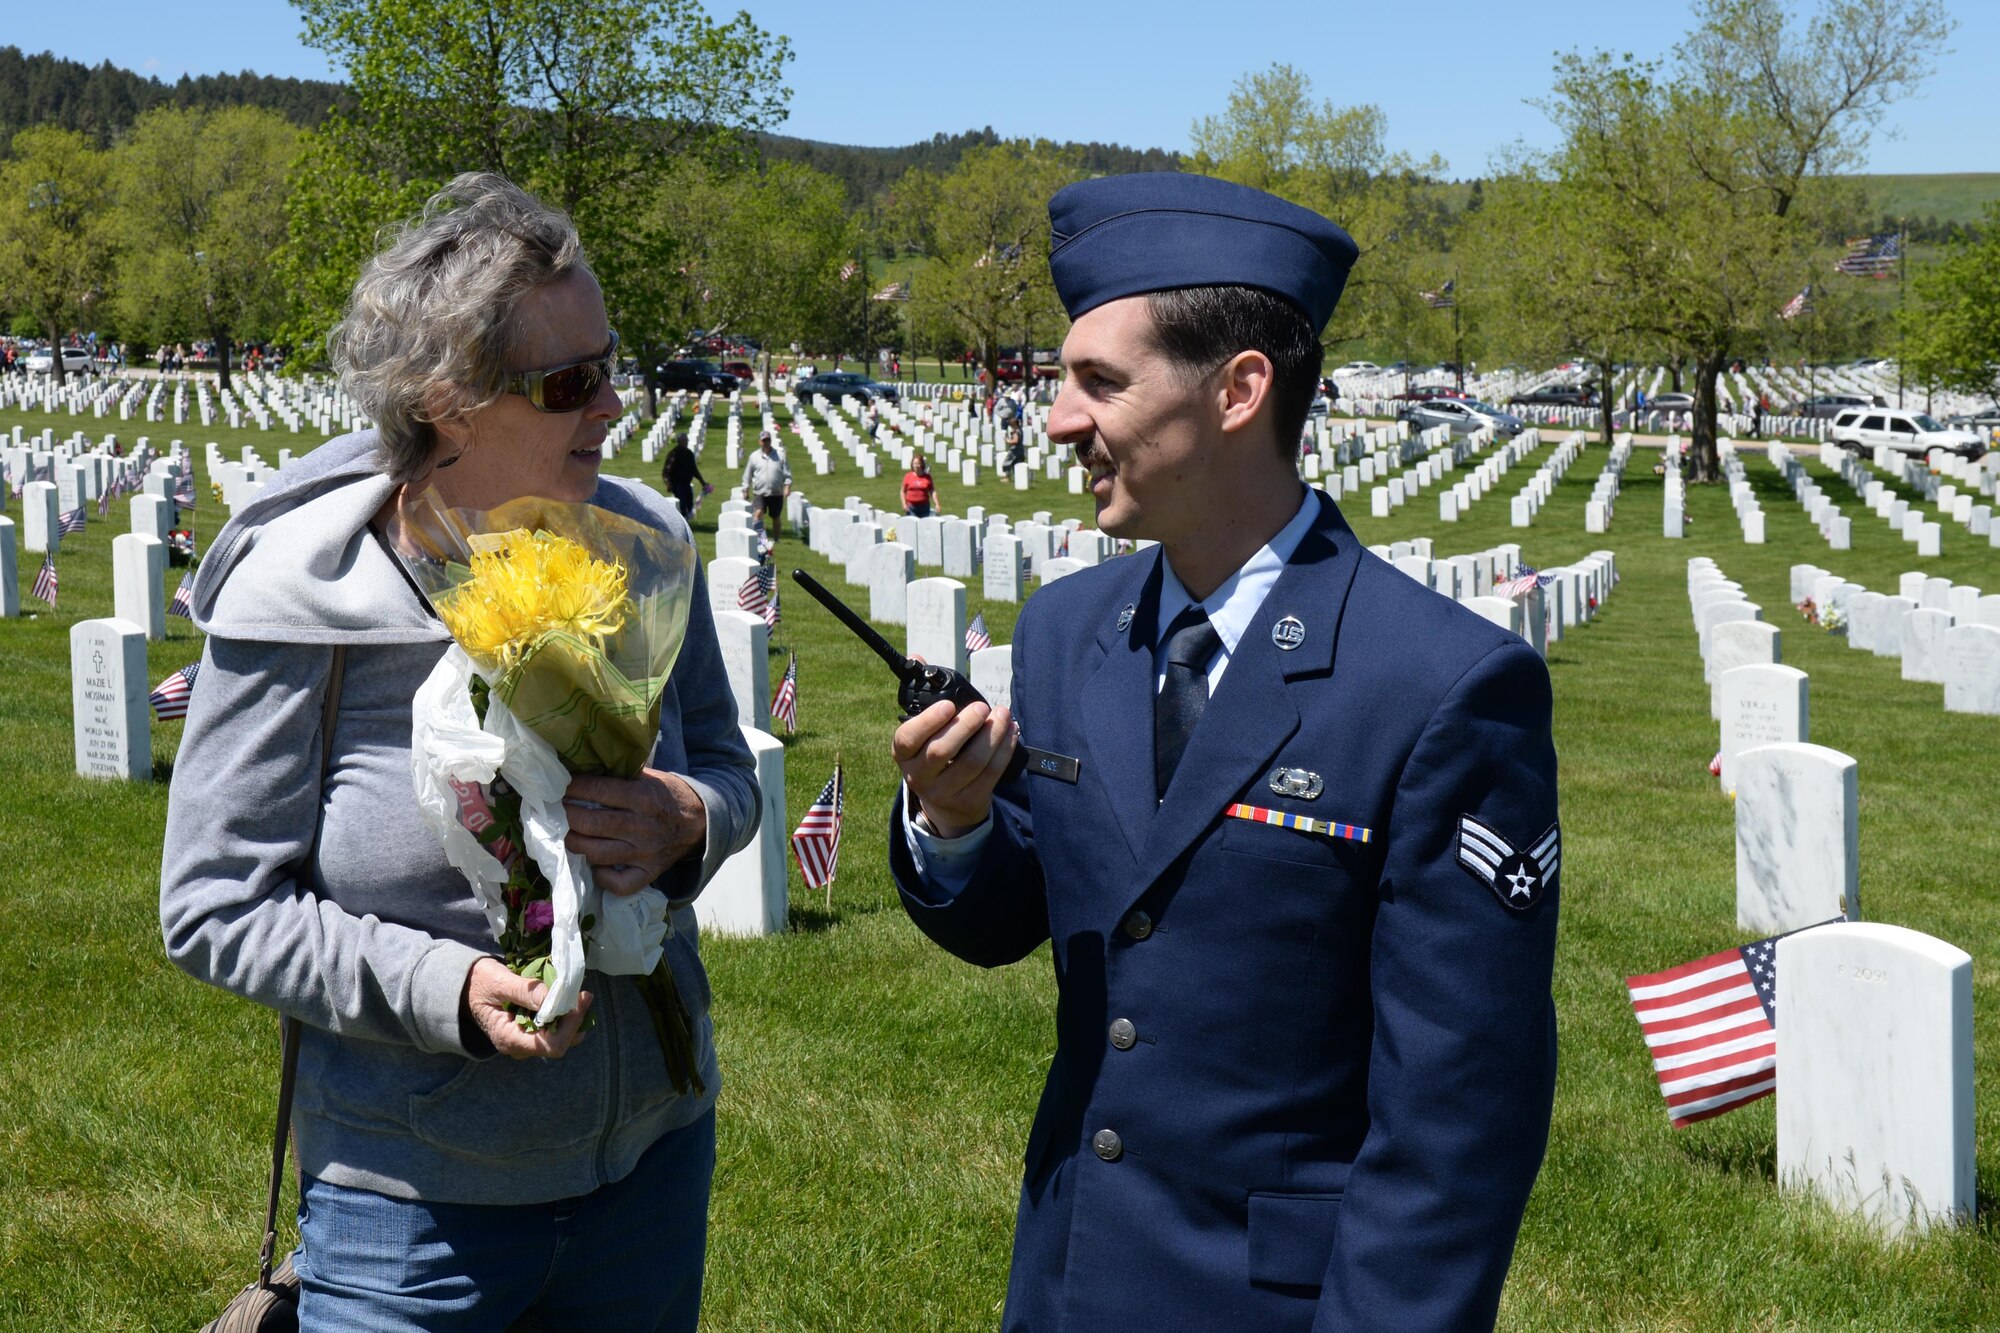 Senior Airman Joseph, an intelligence analyst assigned to the 89th Attack Squadron, helps a spouse locate her husband buried at the Black Hills National Cemetery, S.D., May 29, 2017. Over 180 Airmen volunteered to help locate the tombstones of family members for Memorial Day weekend. (U.S. Air Force Photo by Airman Nicolas Z. Erwin)